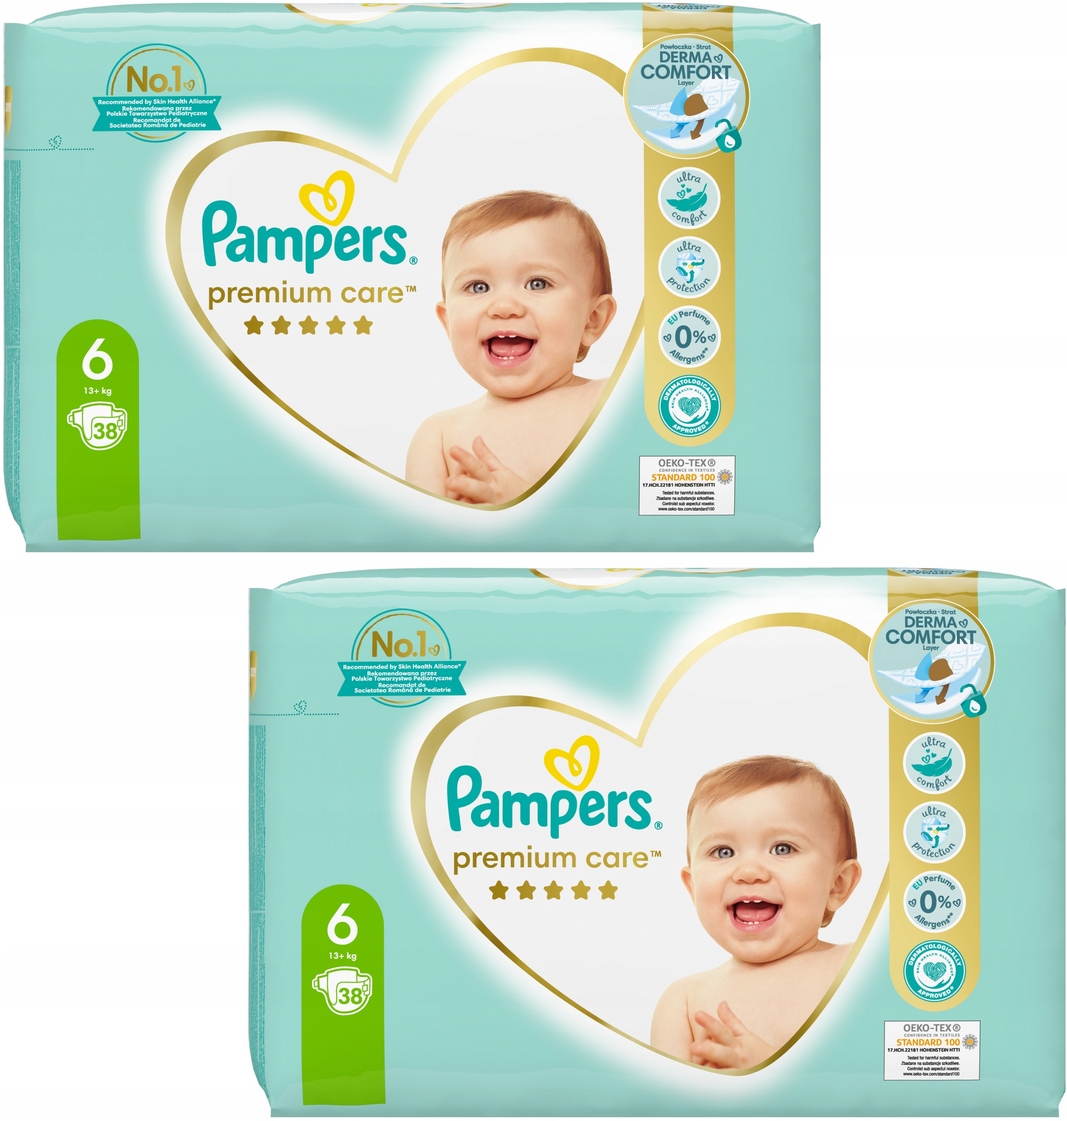 paradise pampers